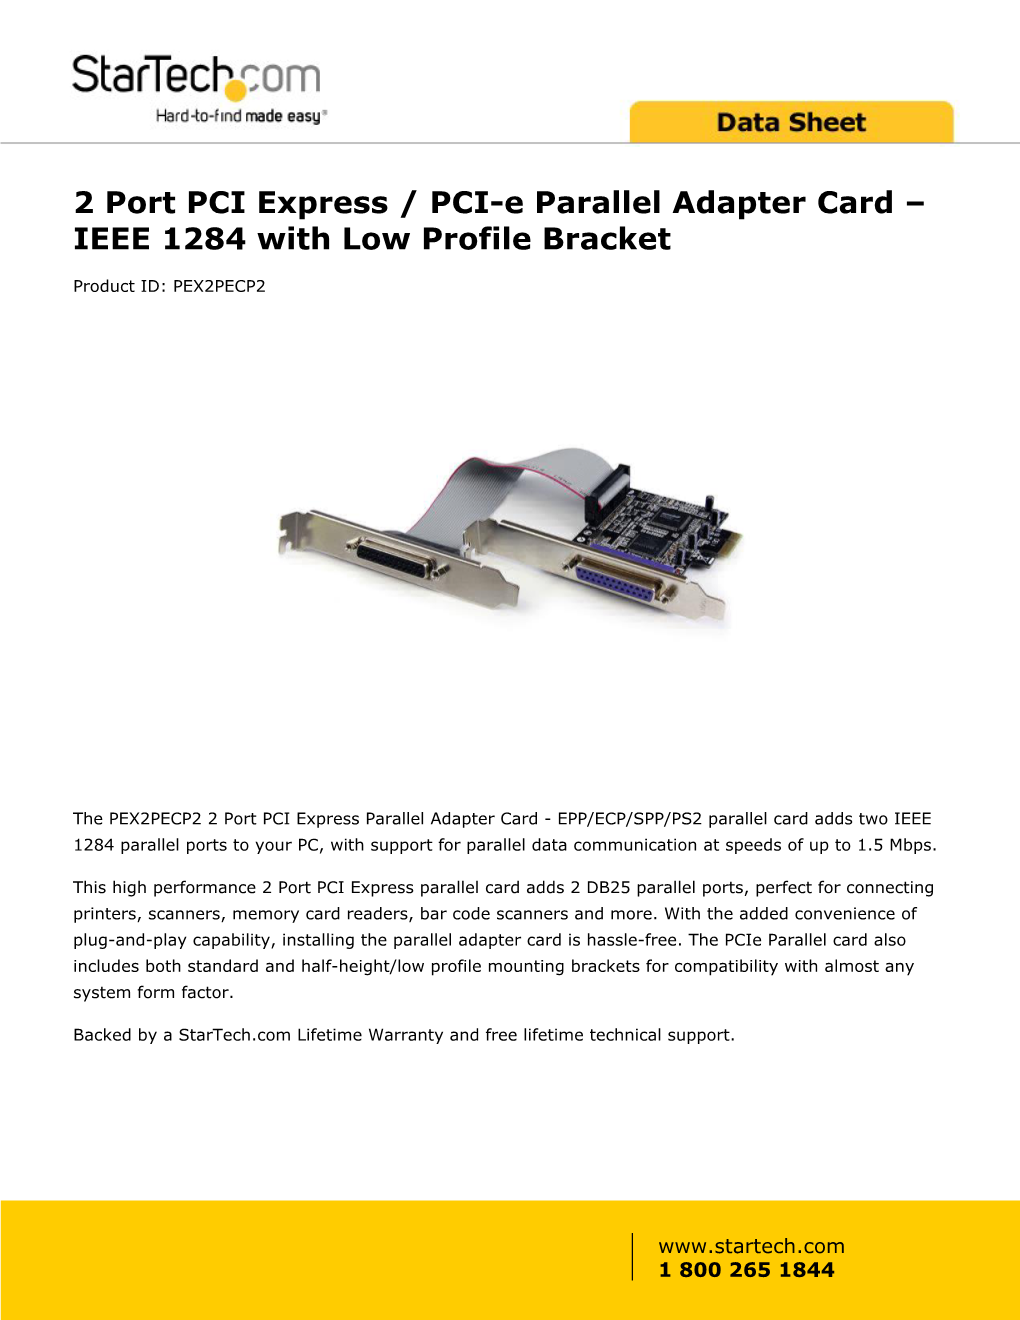 2 Port PCI Express / PCI-E Parallel Adapter Card – IEEE 1284 with Low Profile Bracket